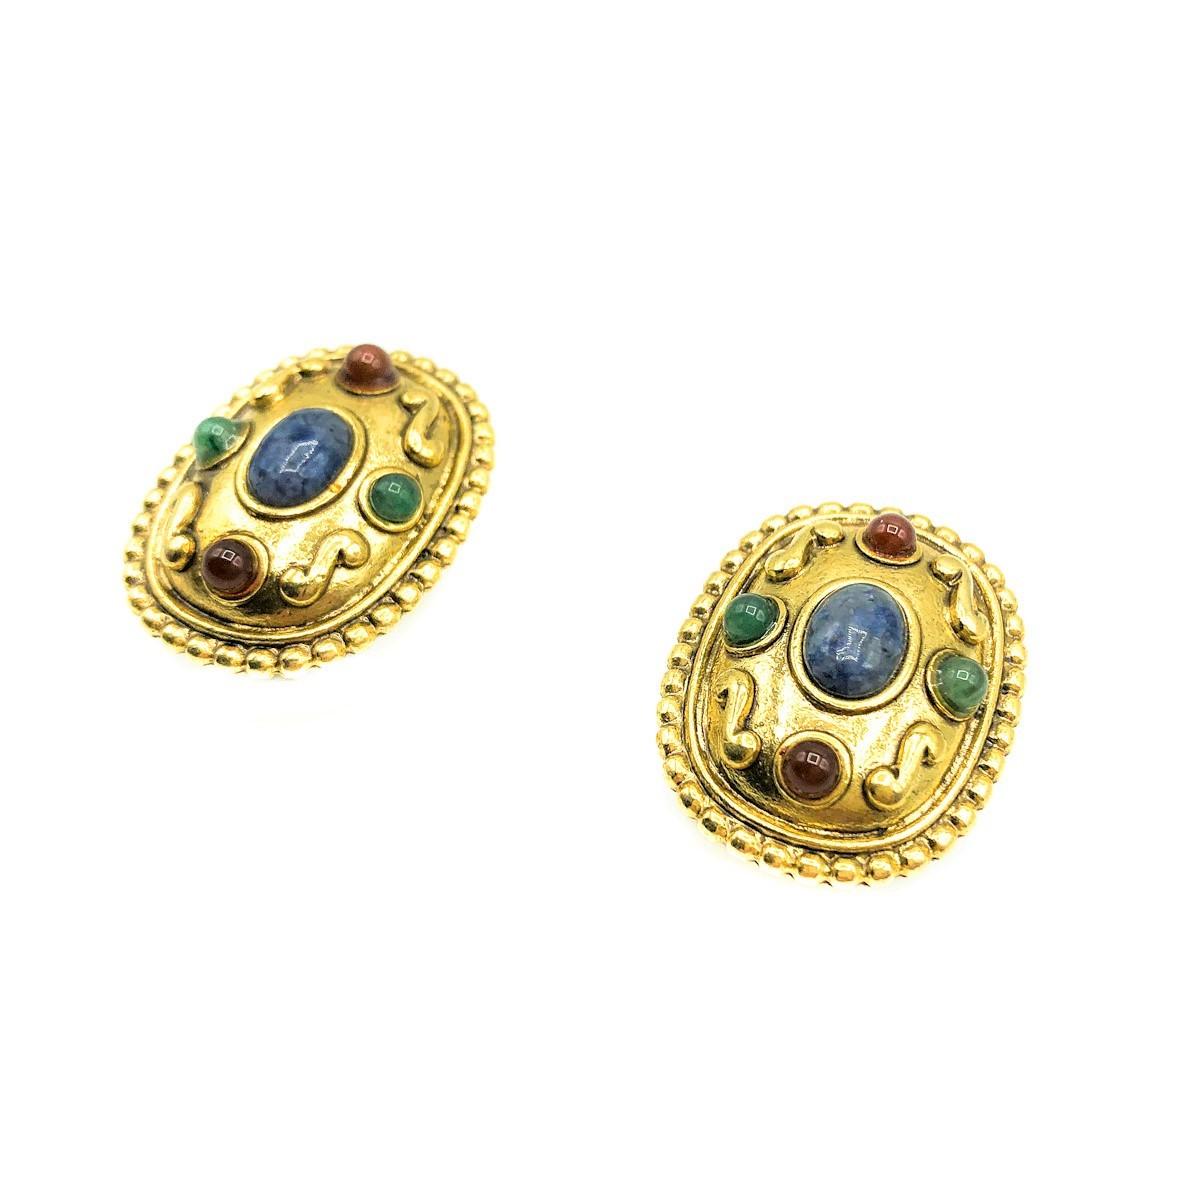 Vintage Etruscan Earrings. Crafted in gold plated metal in an entruscan style and finished with red, blue and green glass cabochon stones for the jewelled look. In very good condition, 2.5cm. Cleverly classic clips. Should you choose to buy from us,